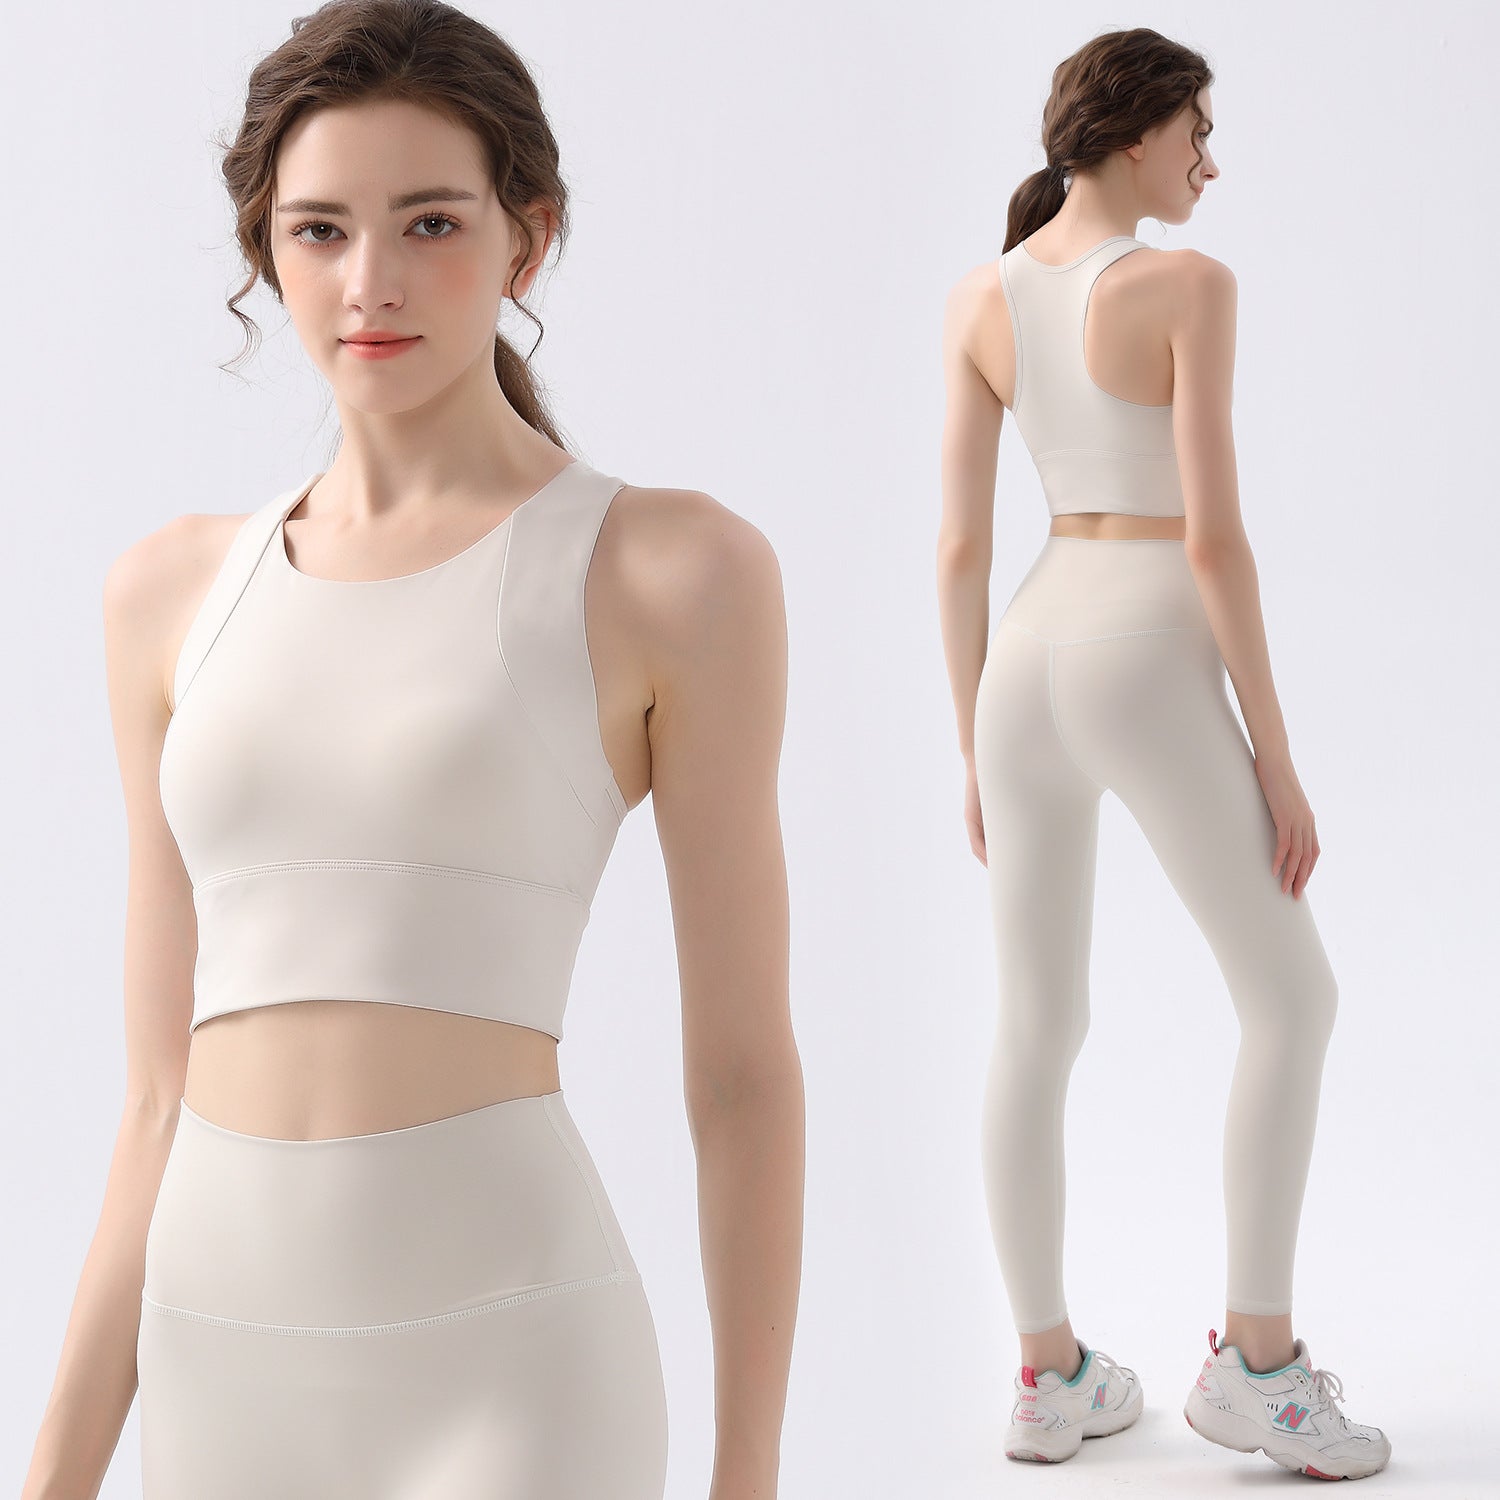 Beauty Back High Strength Exercise Workout Outfit